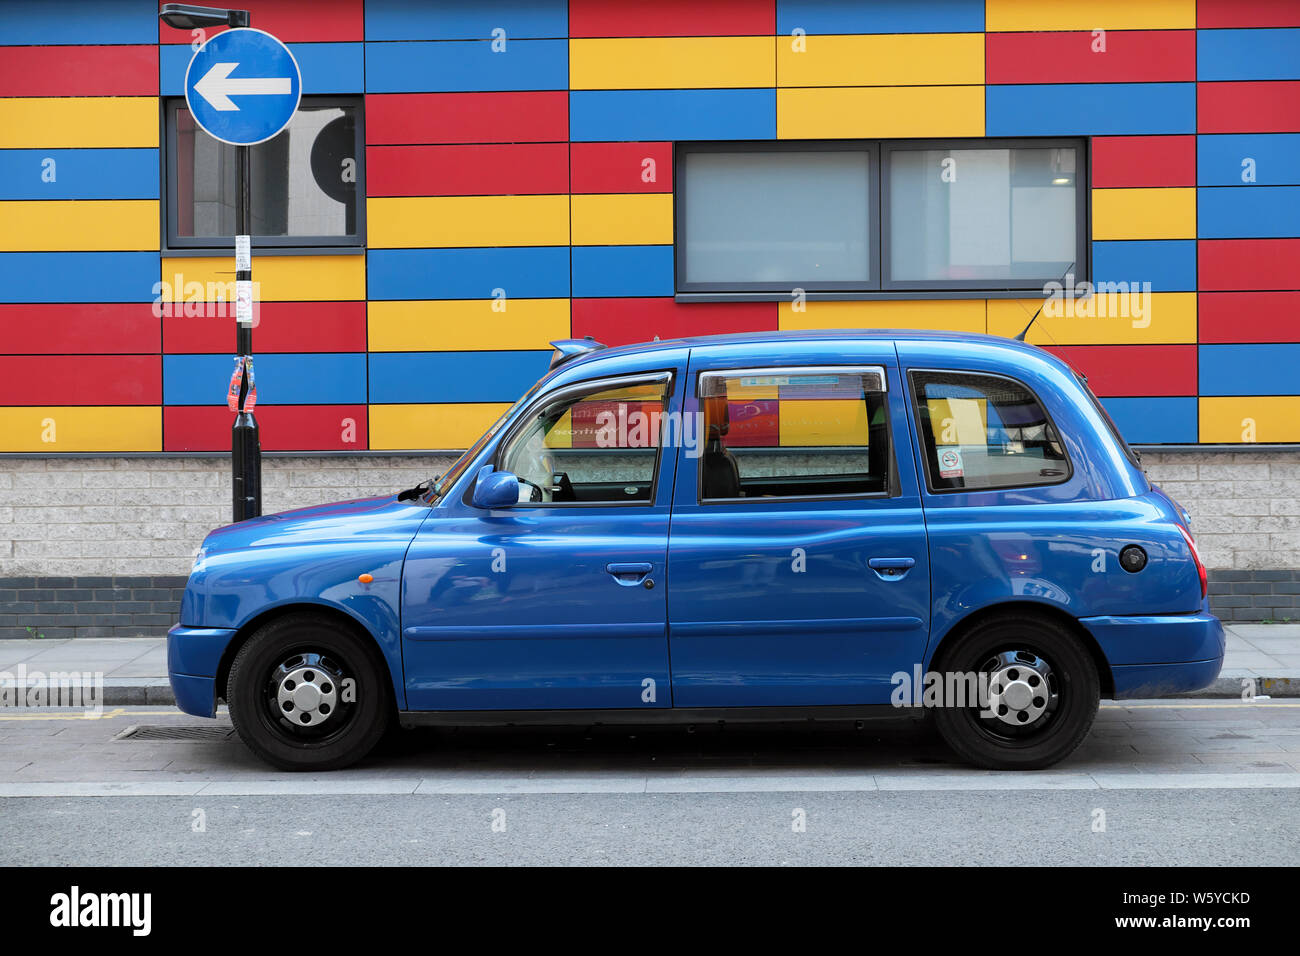 Blue taxi parked outside colourful modern Prior Weston primary school Golden Lane campus building in Whitecross Street London EC1  UK  KATHY DEWITT Stock Photo